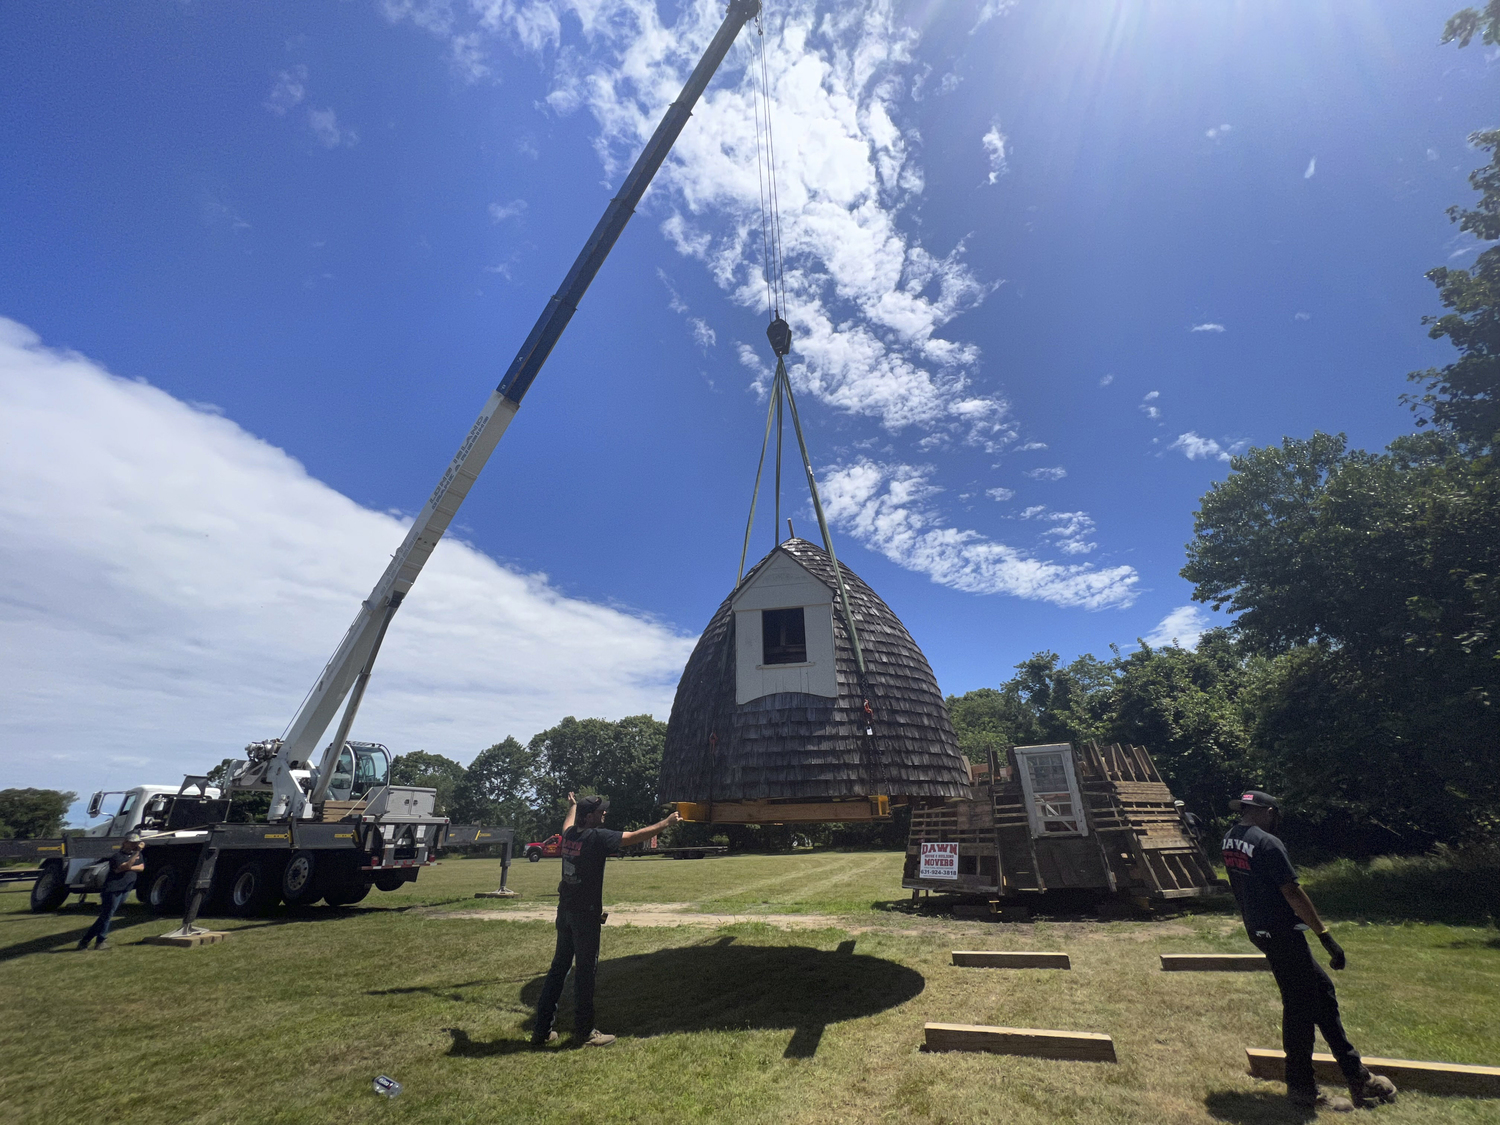 The Dix Windmill was disassembled and moved to the Great Lawn for storage in July 2022. FILE PHOTO